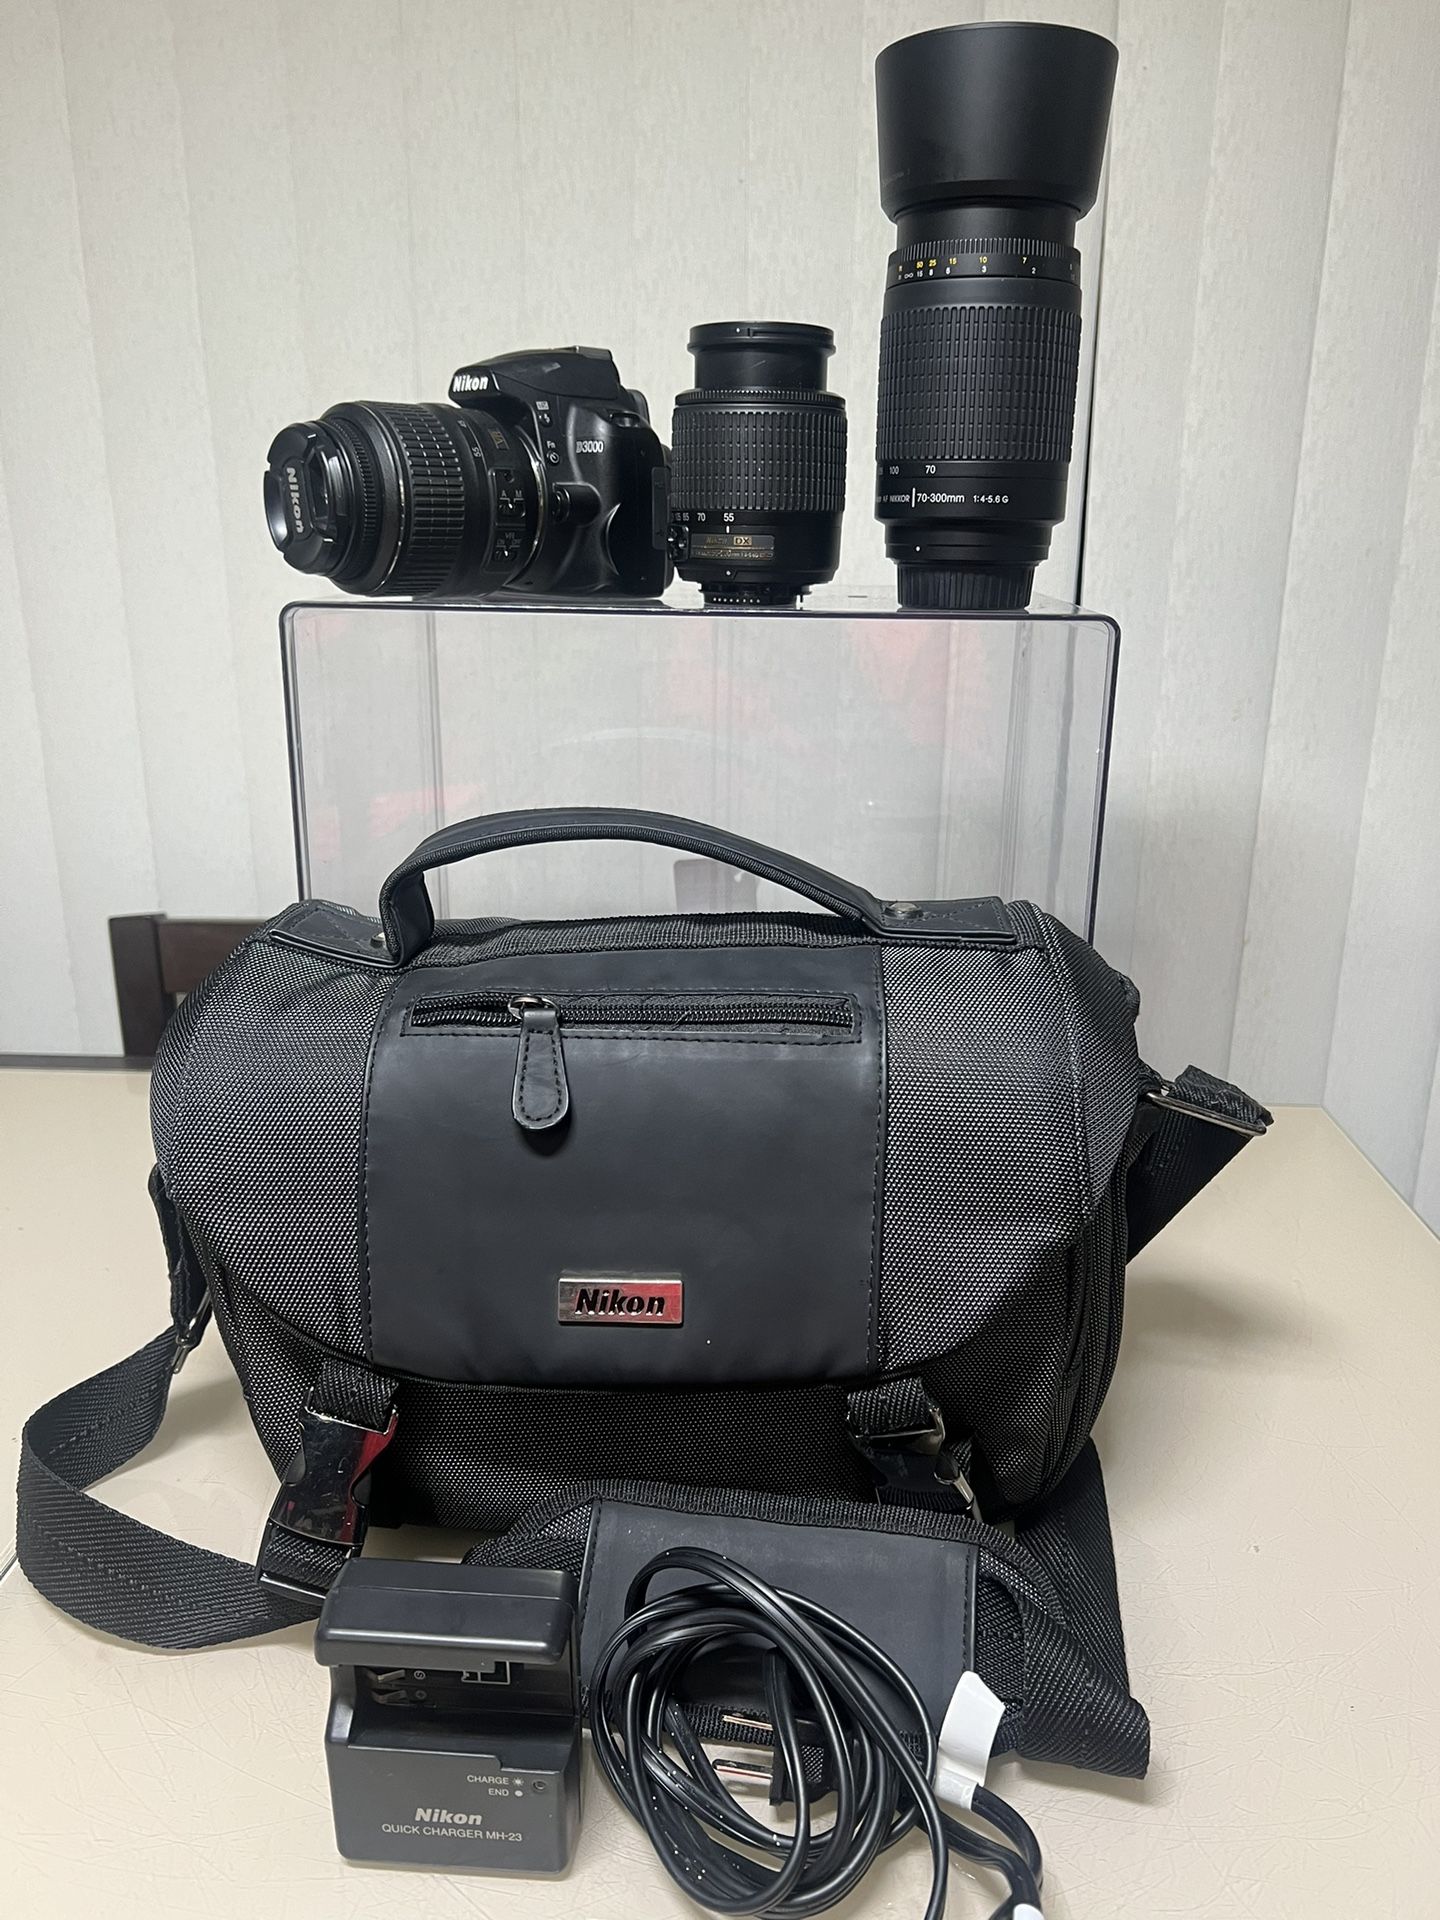 Nikon D3000 10.2MP DSLR Digital Camera w 18-55mm 55-200mm 70-300mm Bag Kit Read! Up for sale a Nikon D3000 10.2mp camera kit in overall good condition